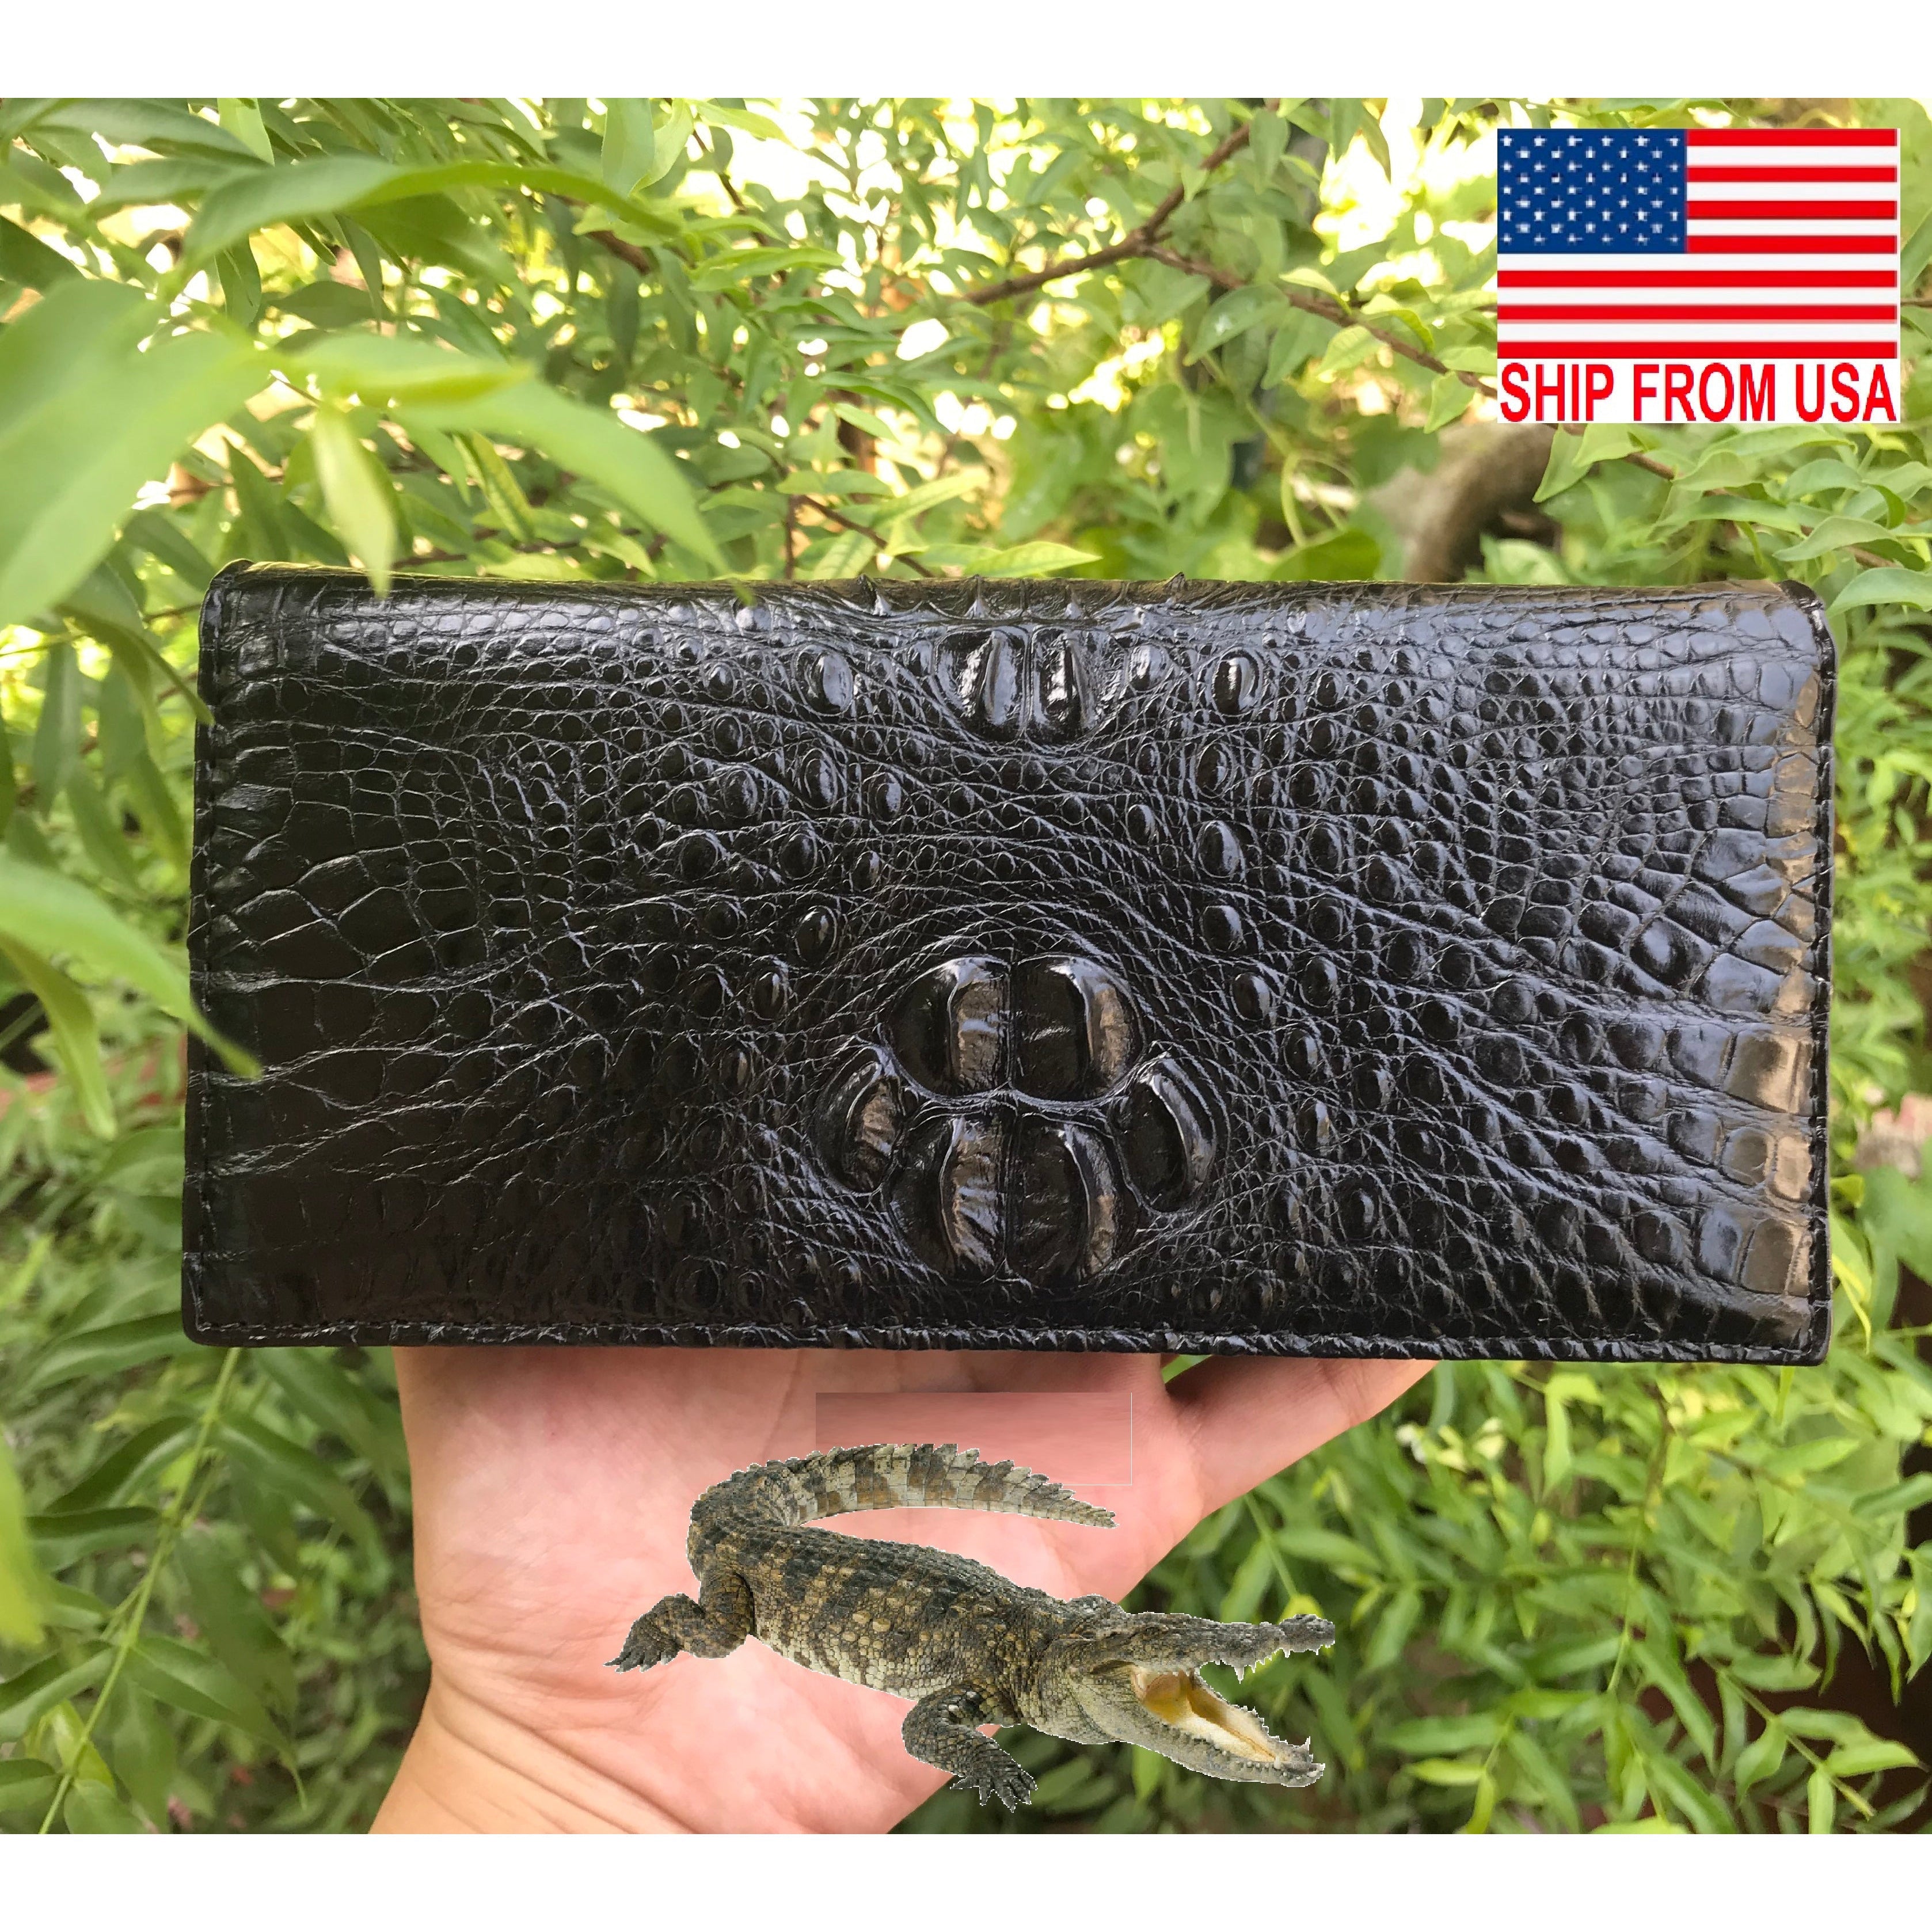 SOLD. 2 Vintage (1940s era) Alligator Leather Purses | Heritage  Collectibles of Maine